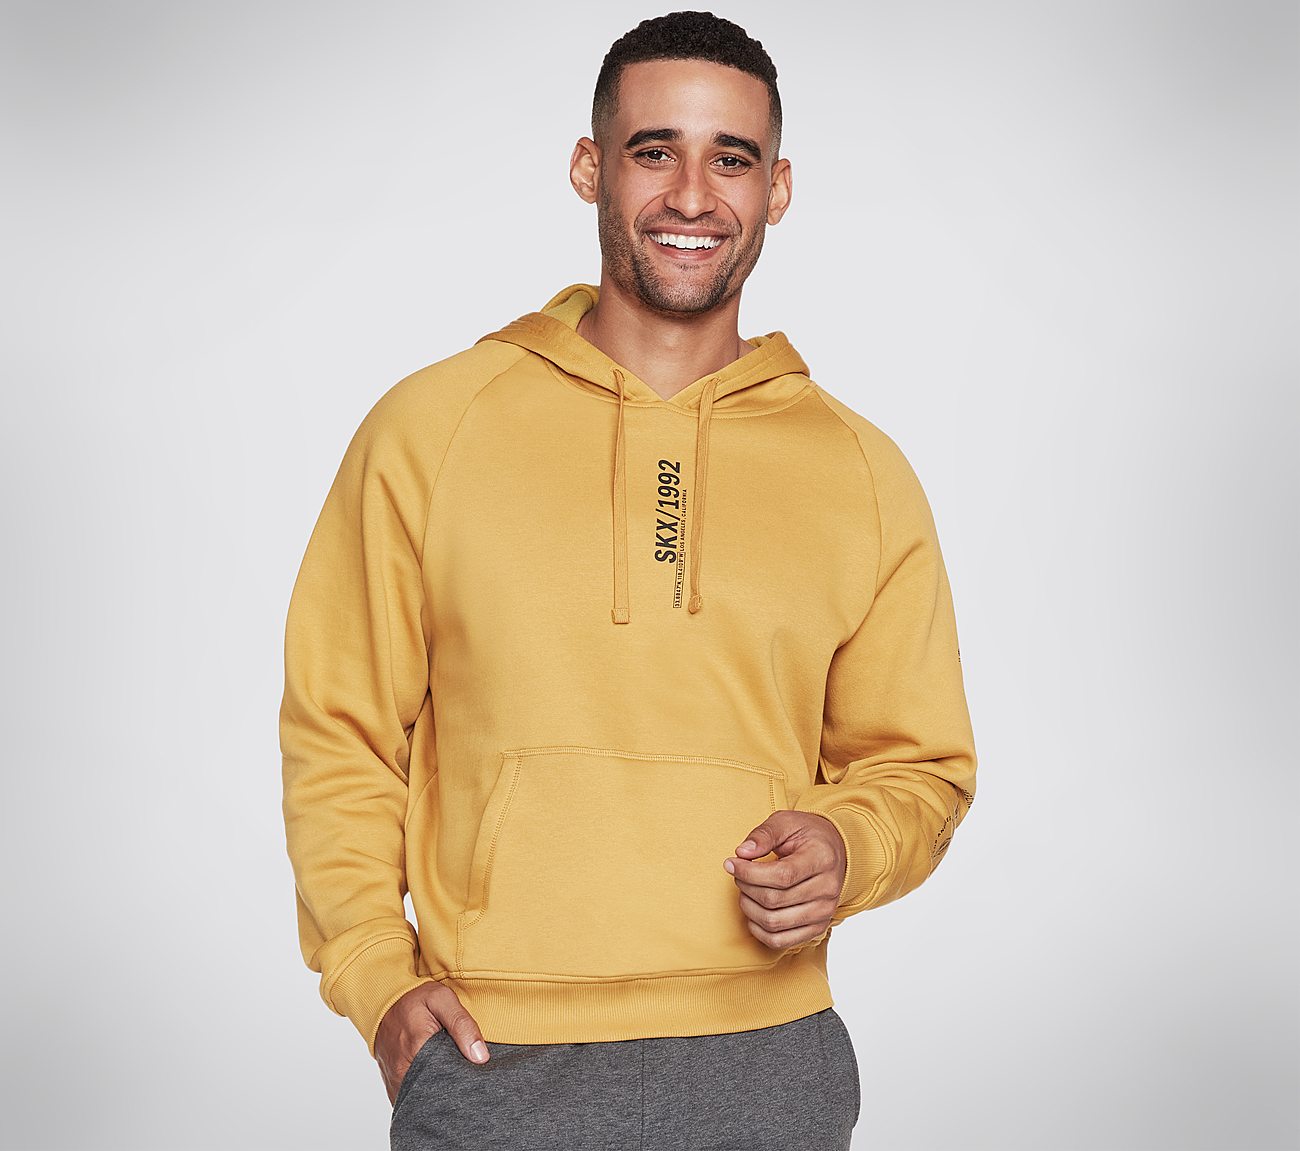 SKX VAROCITY PULLOVER, GOLD Apparel Lateral View